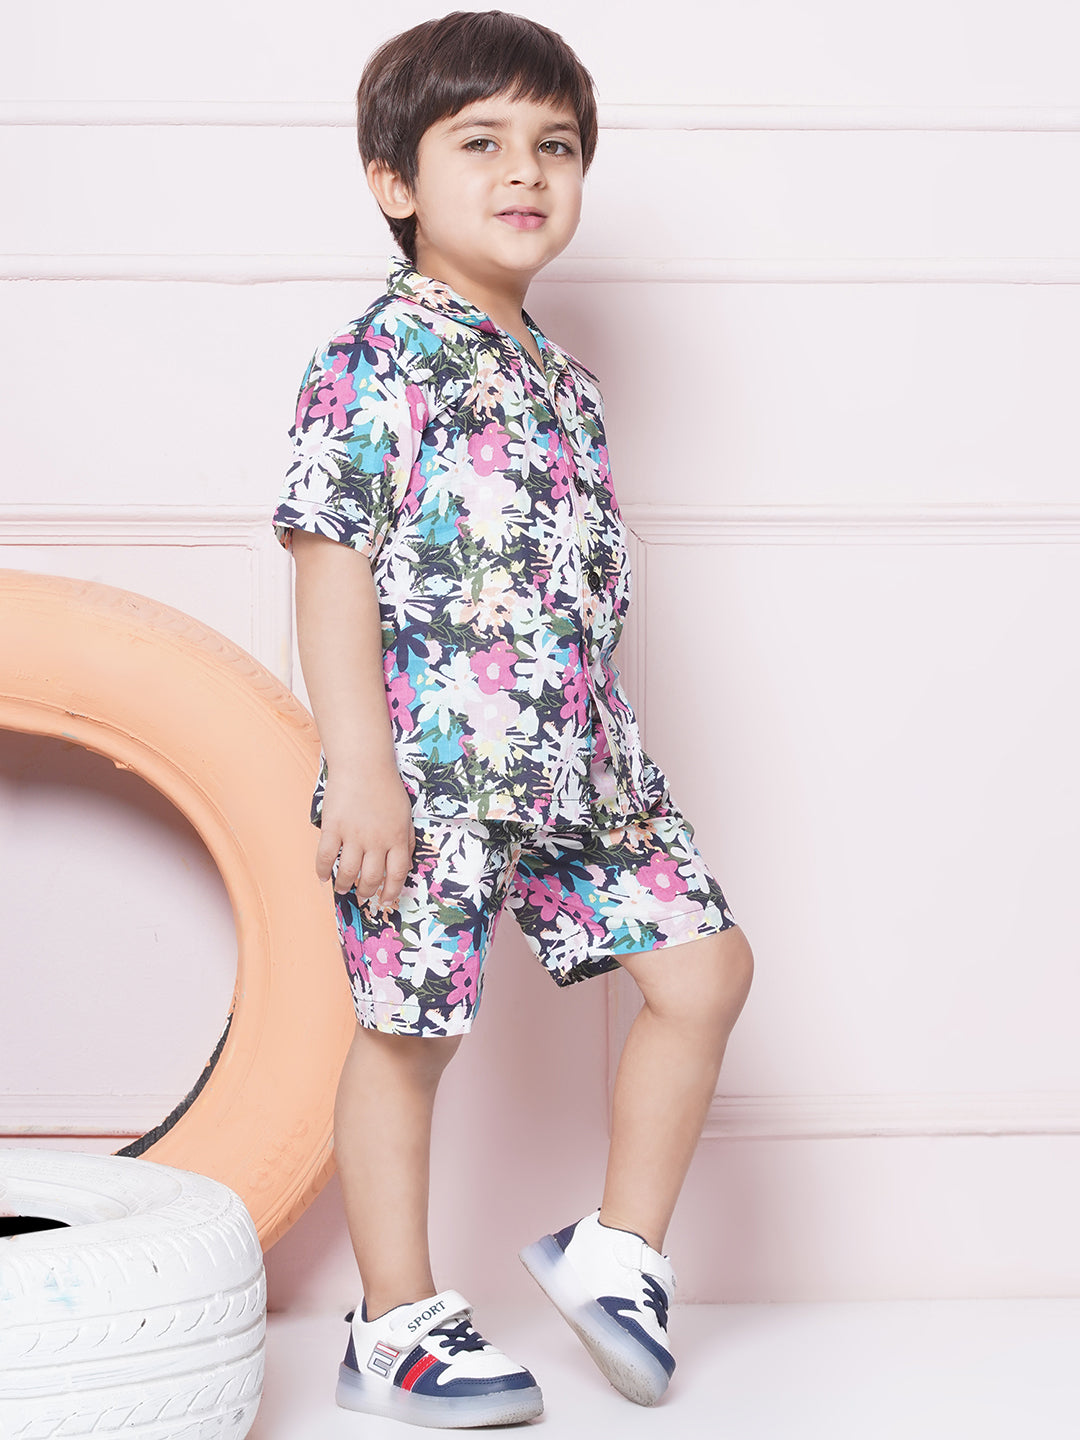 AJ Dezines Multi-Color Cotton Shirt & shorts Half Sleeves with Collar and Floral CO-ORDS Set for Boys